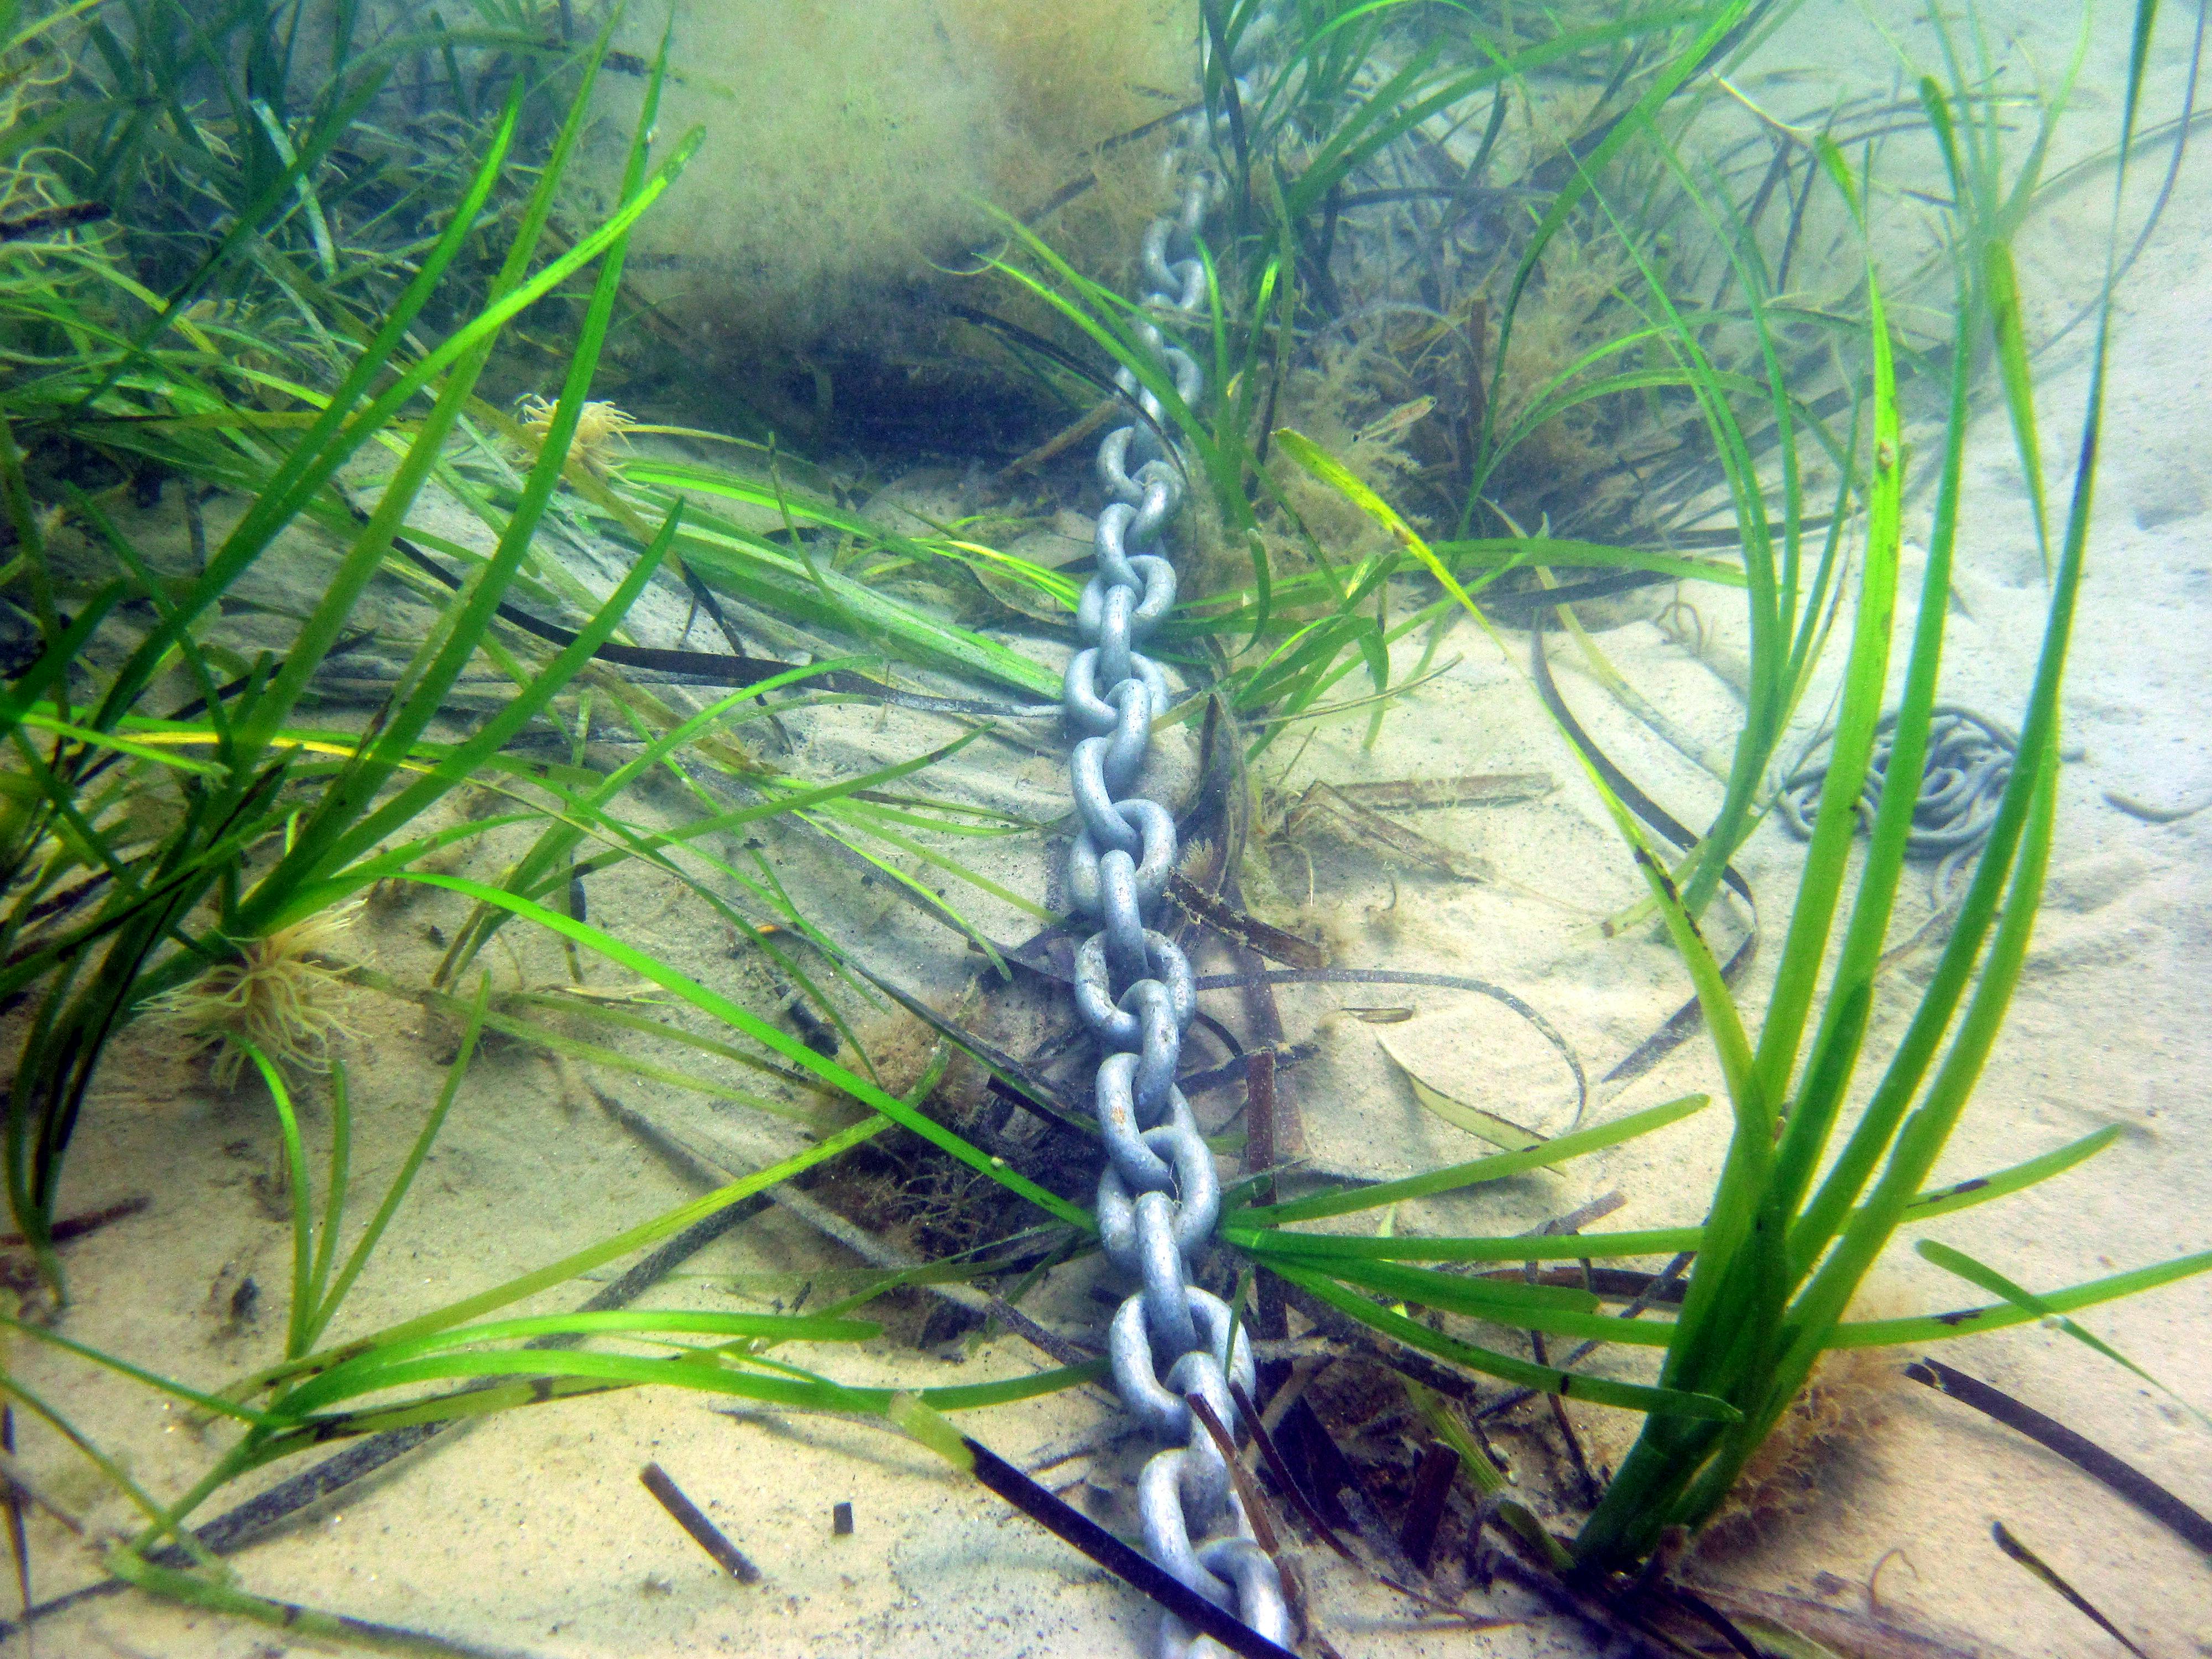 Traditional anchor chain on seabed amongst the seagrass (photo credit Neil Garrick-Maidment)